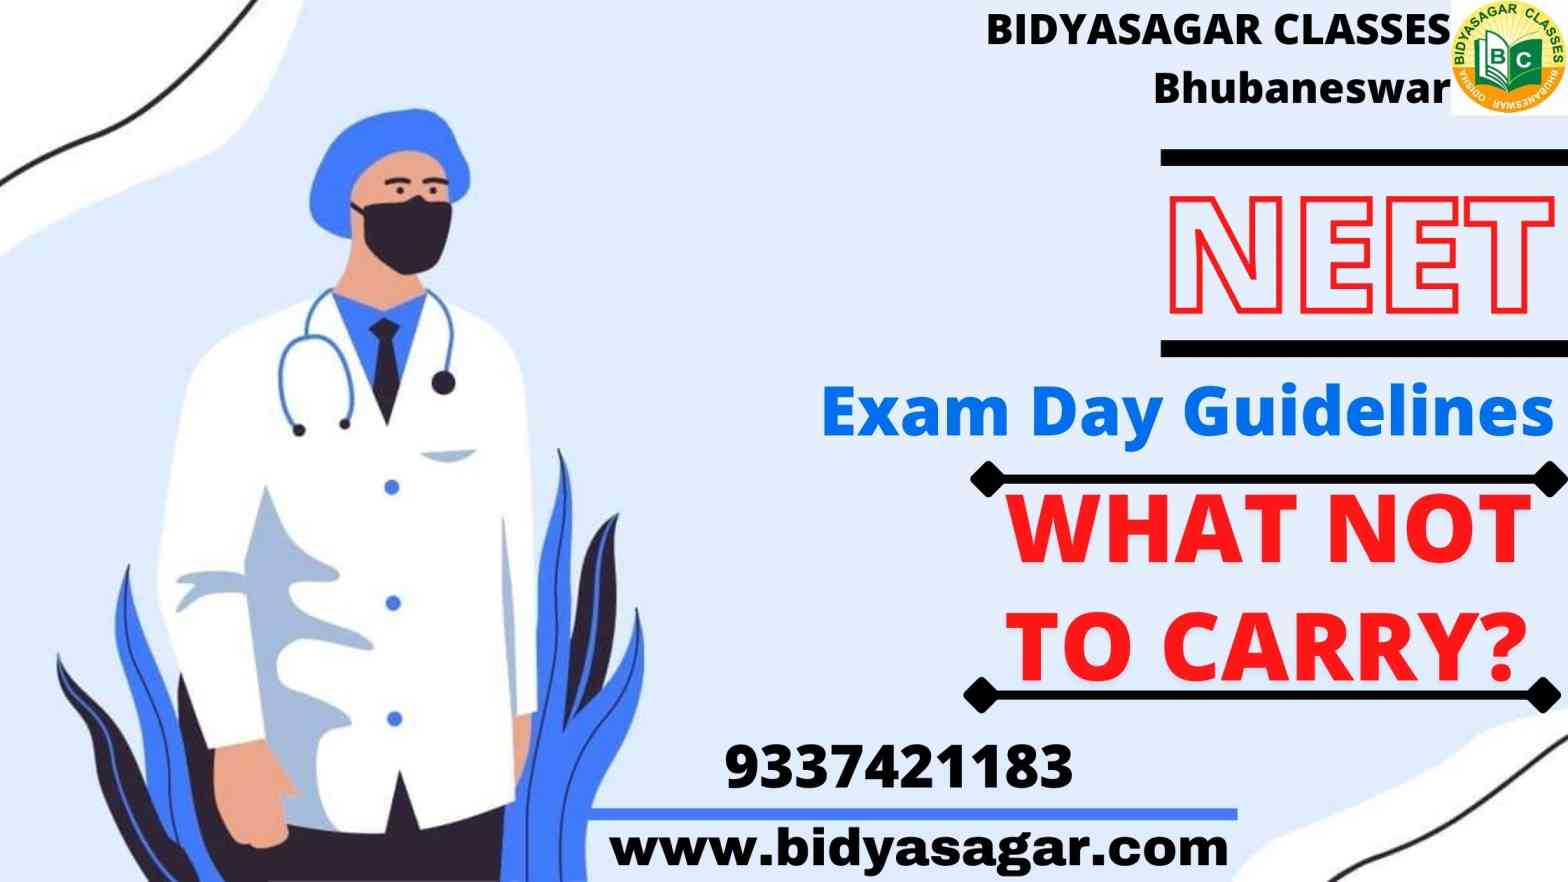 NEET 2021 Exam Day Guidelines: What Not to Carry?